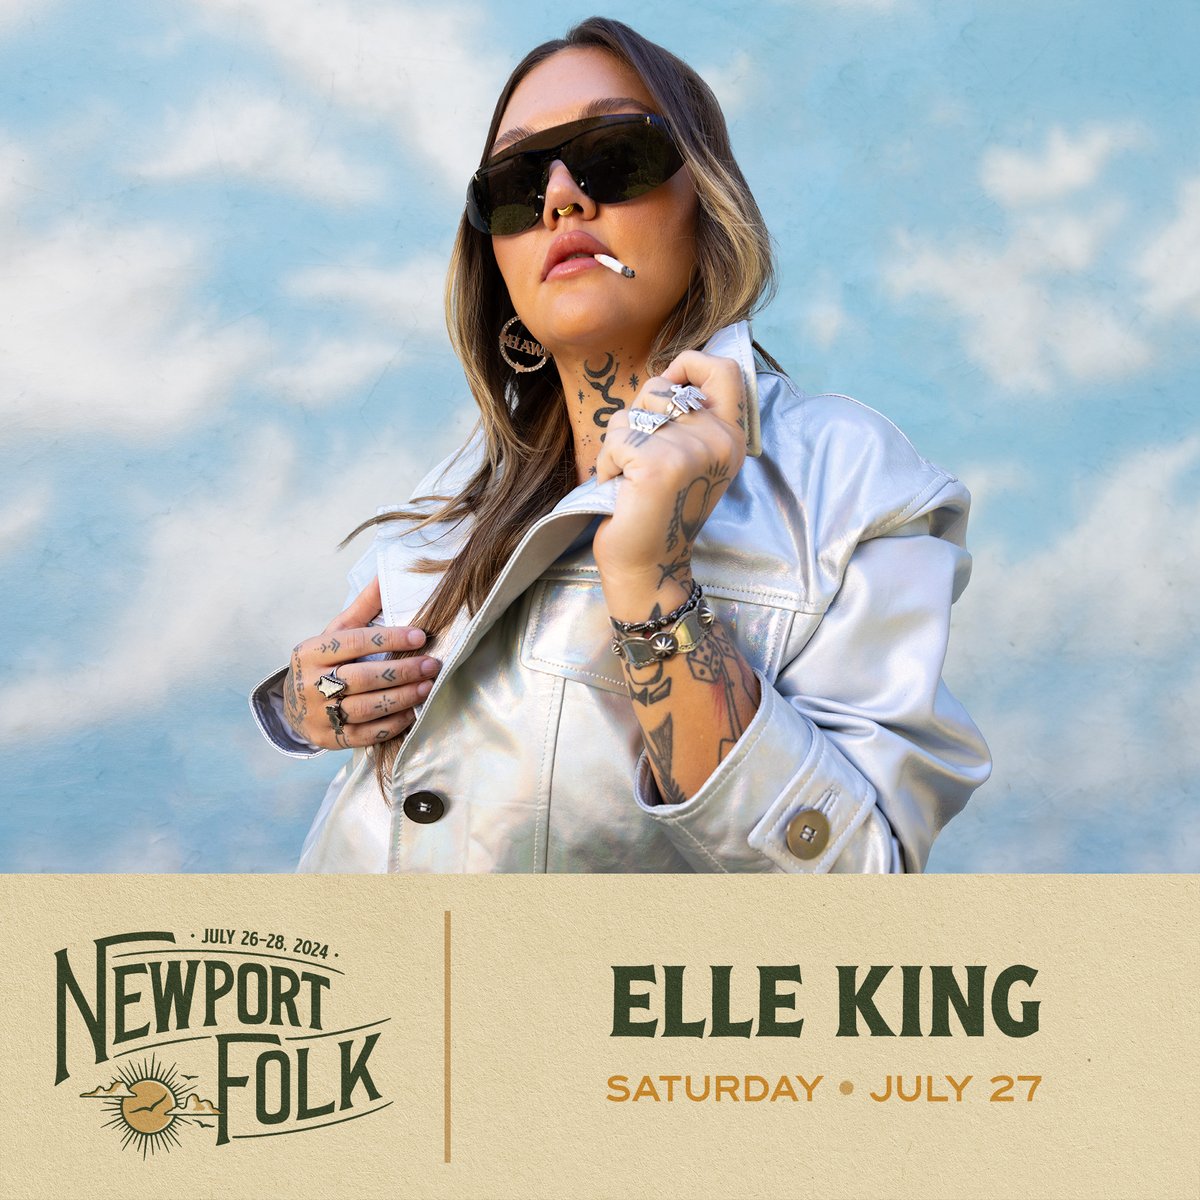 Please welcome @ElleKingMusic to this summer's Saturday lineup! @newportfestsorg has provided a grant to @musichealthall, which provides access to healthcare by removing barriers, finding solutions, and restoring health and hope for music industry professionals nationwide.